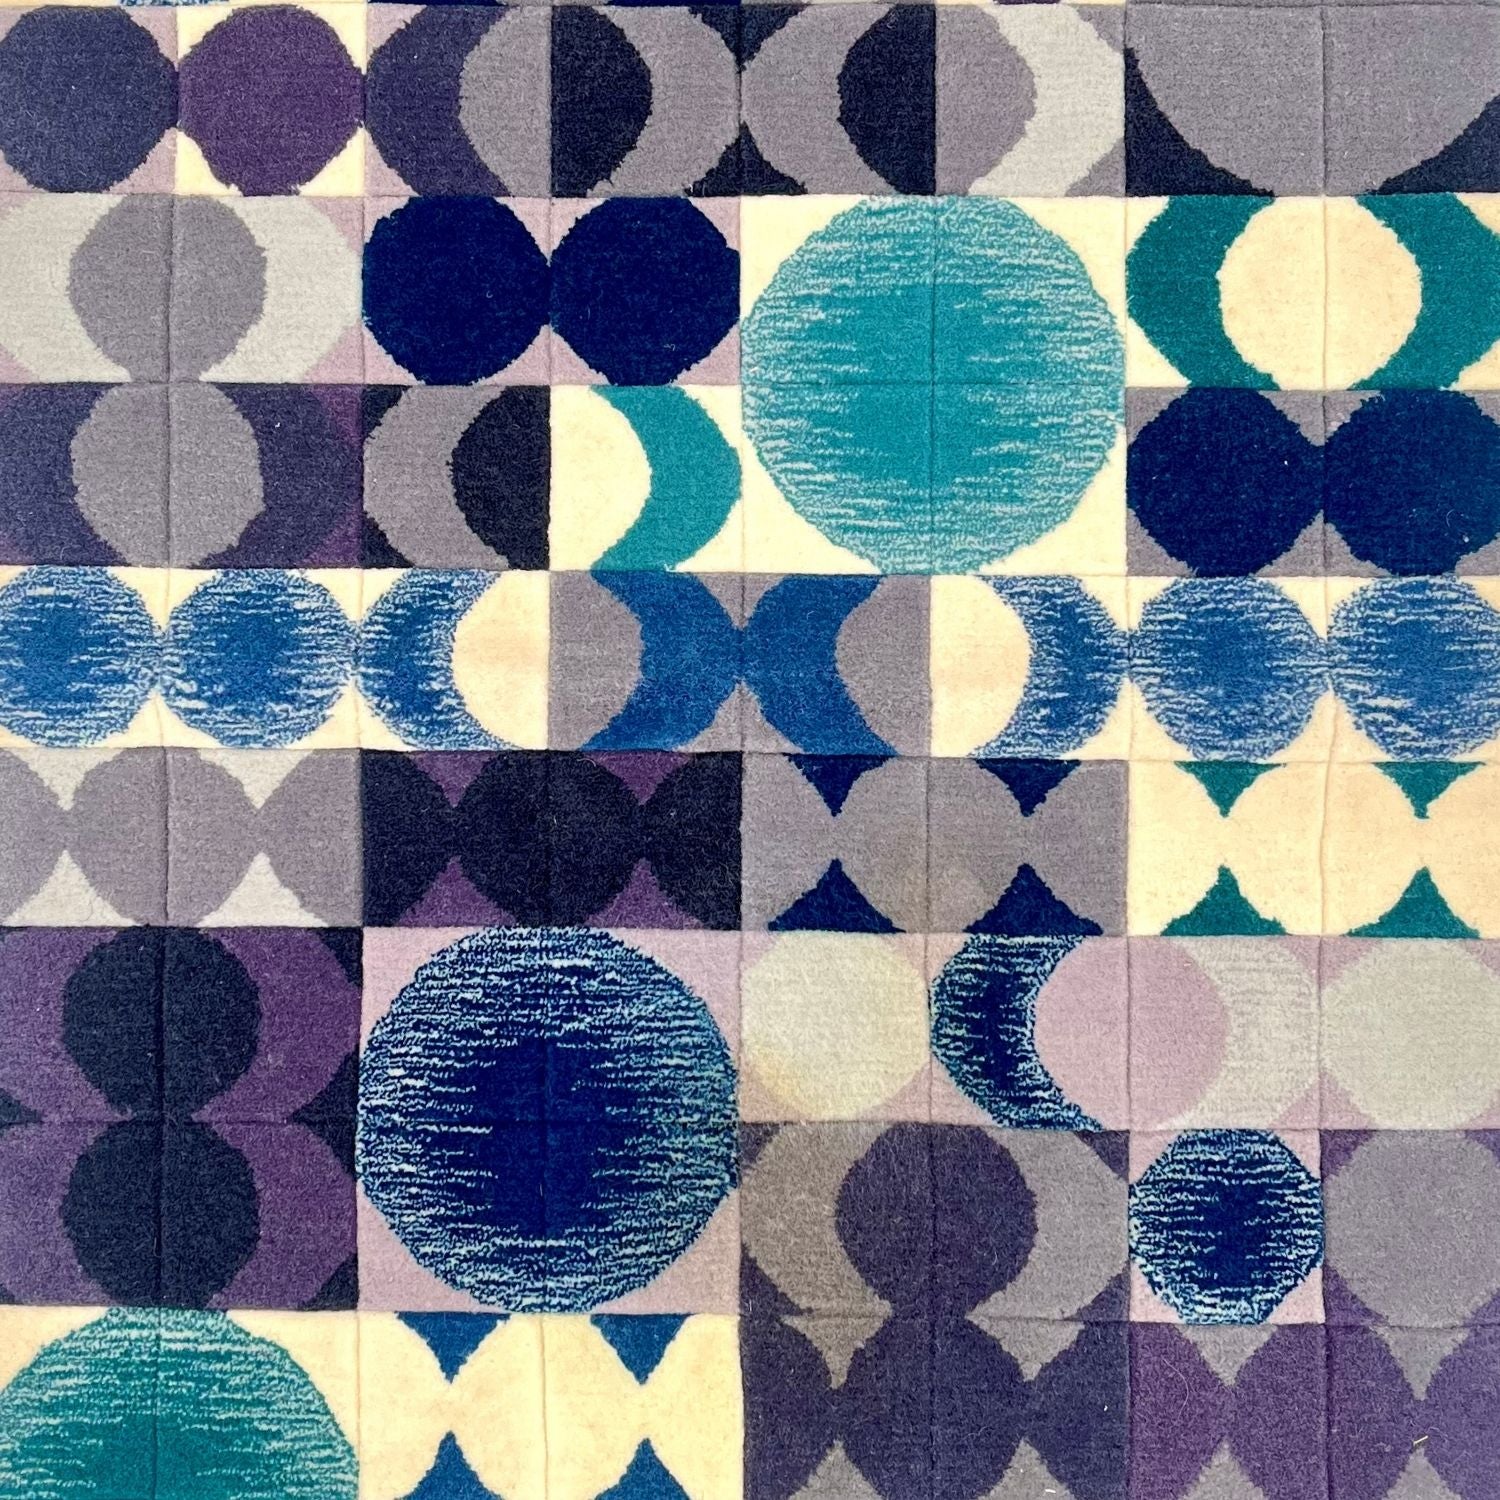 Detail of rug with a geometric and circular pattern in shades of blue, purple, and ivory.